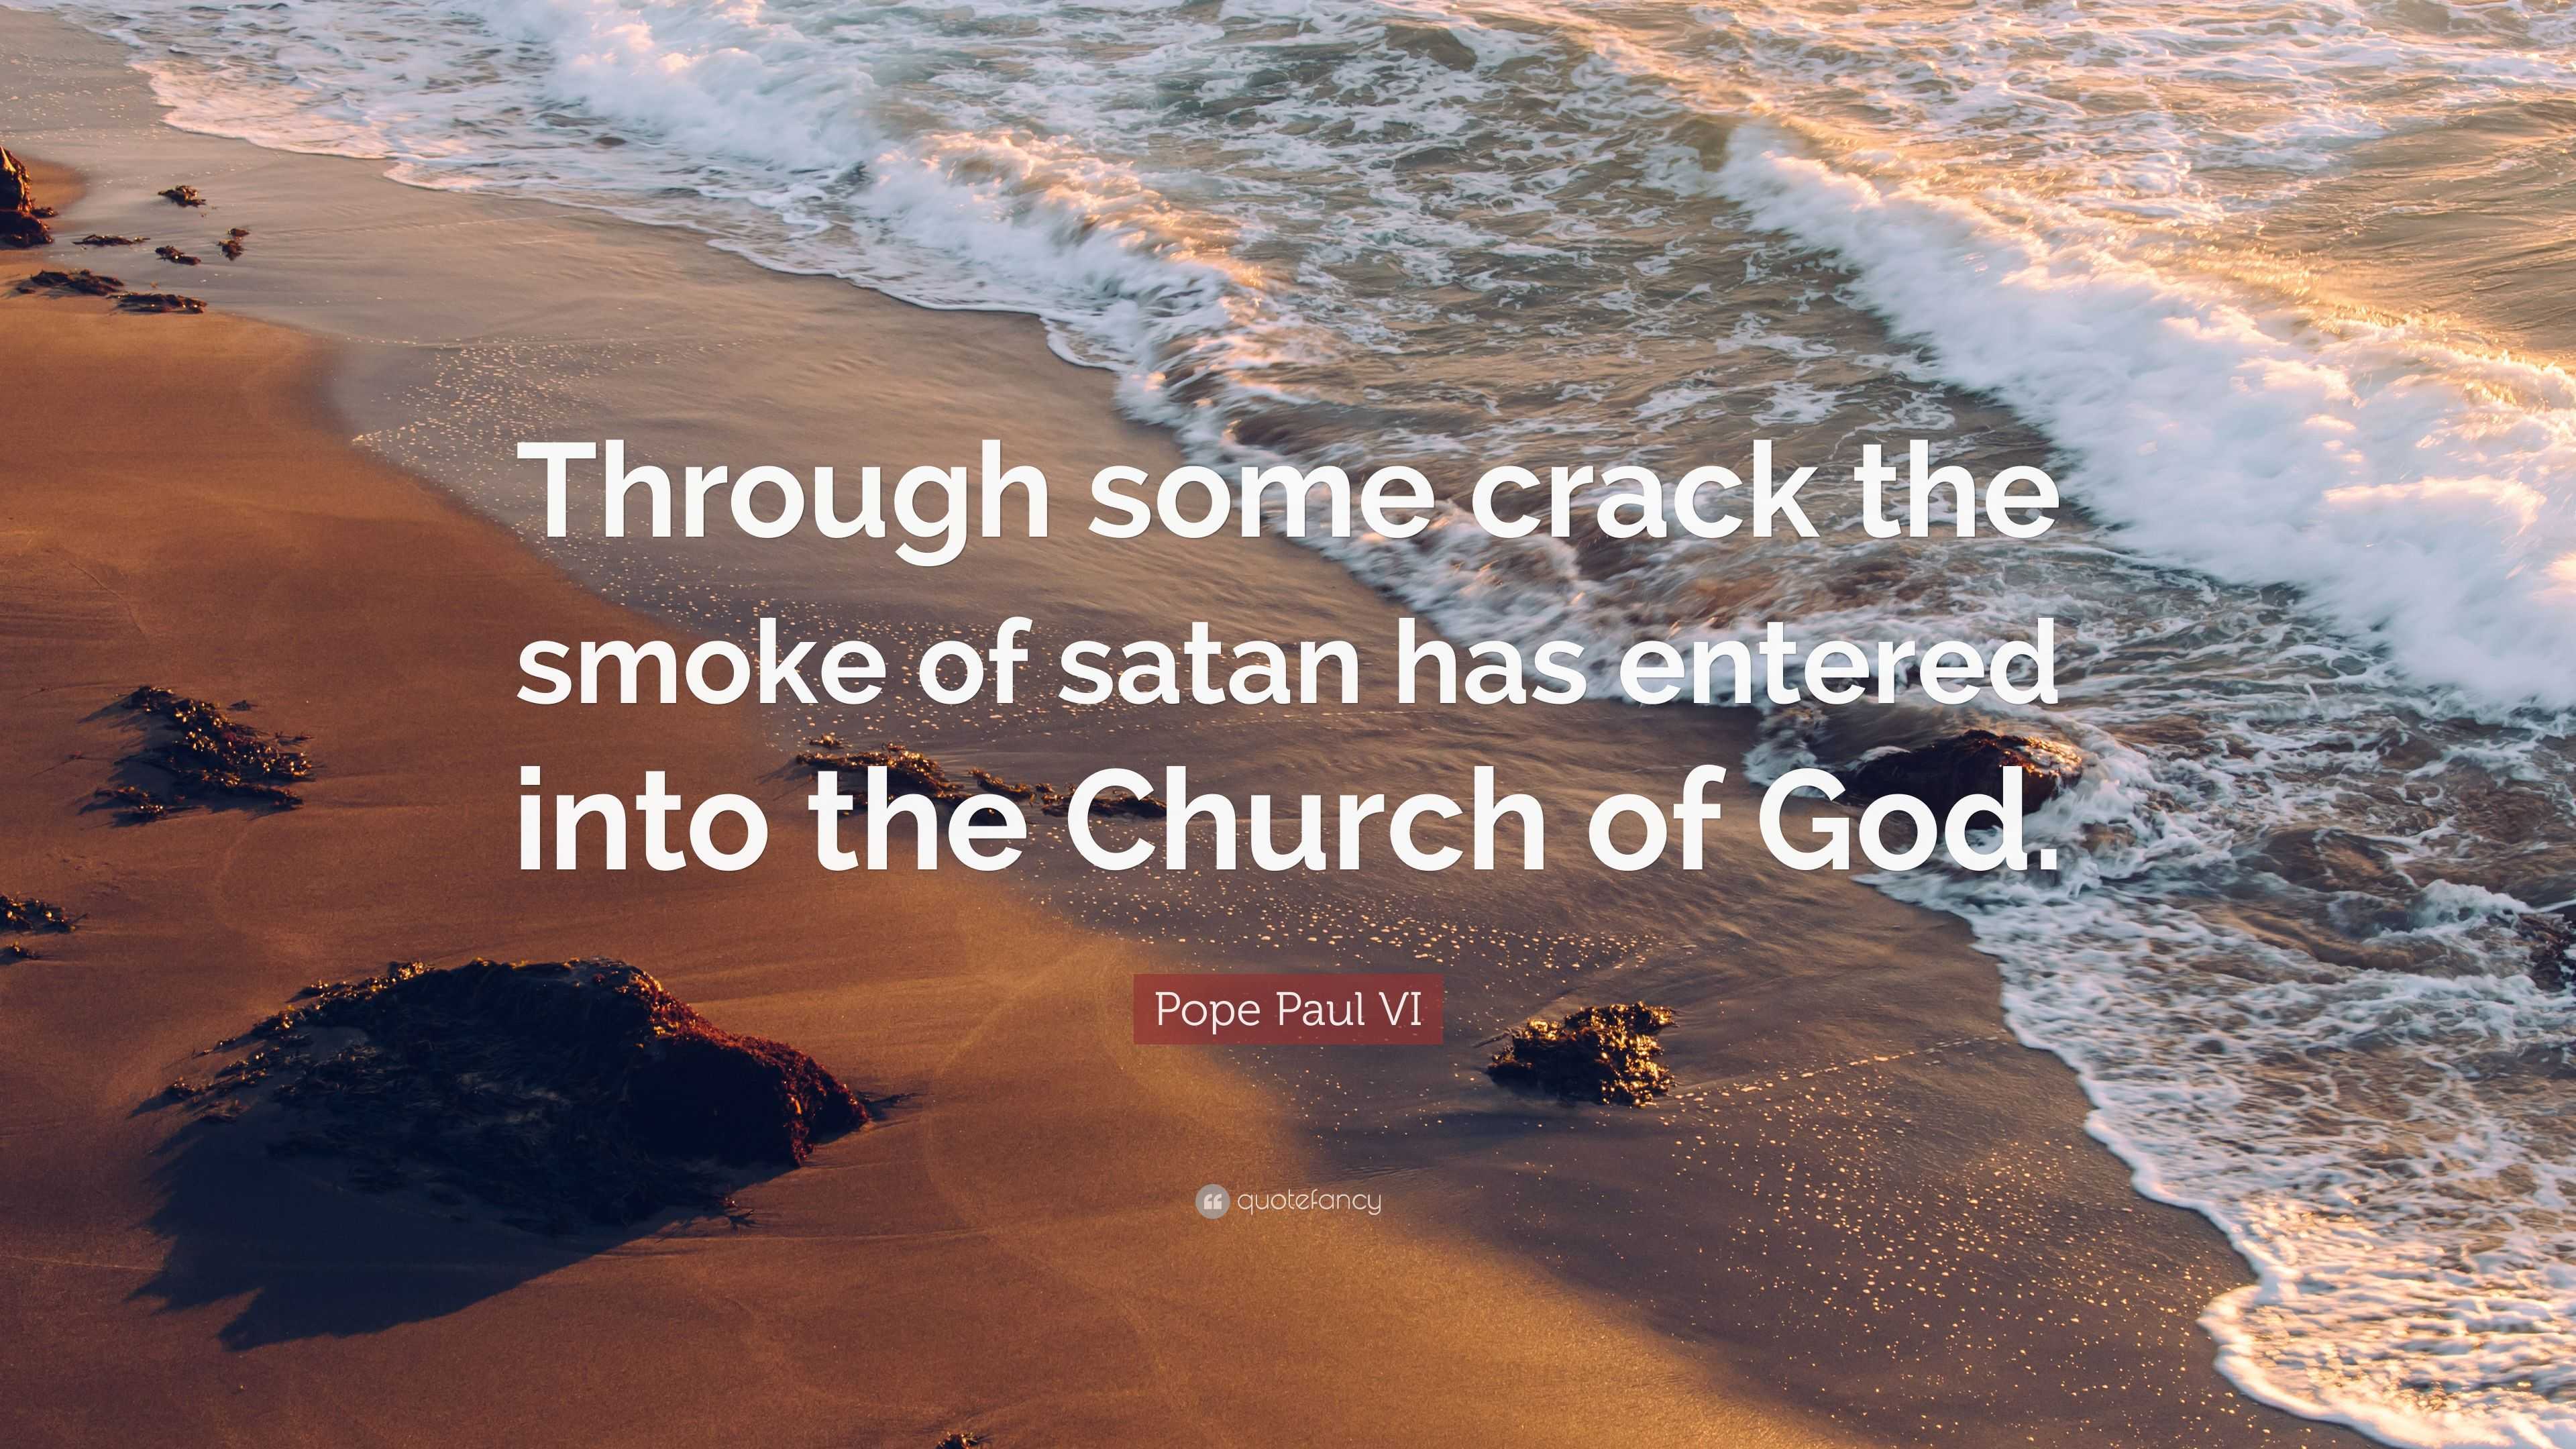 Pope Paul VI Quote: “Through some crack the smoke of satan has entered ...